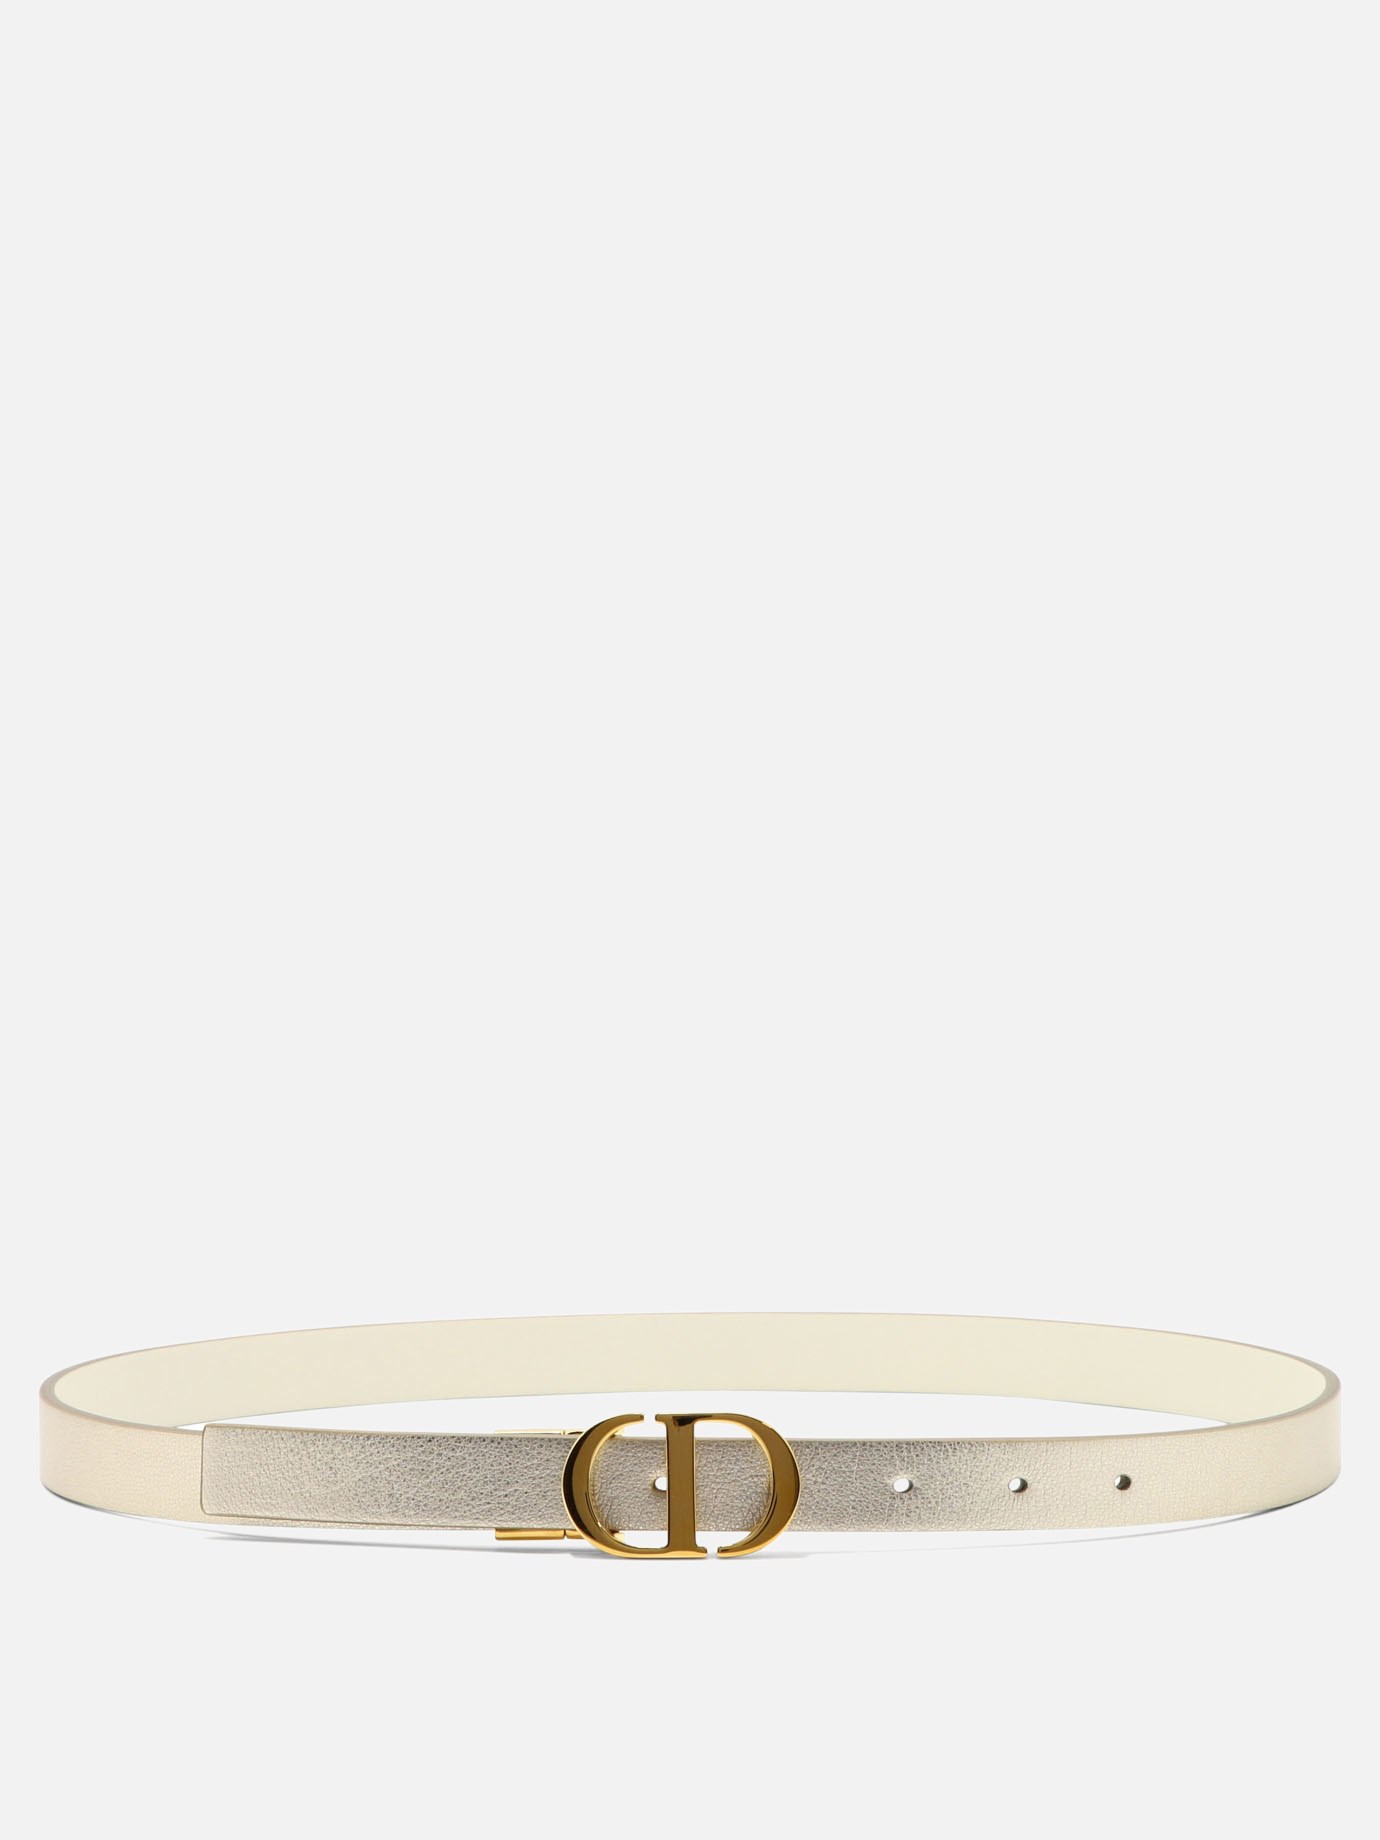  30 Montaigne  reversible belt by Dior